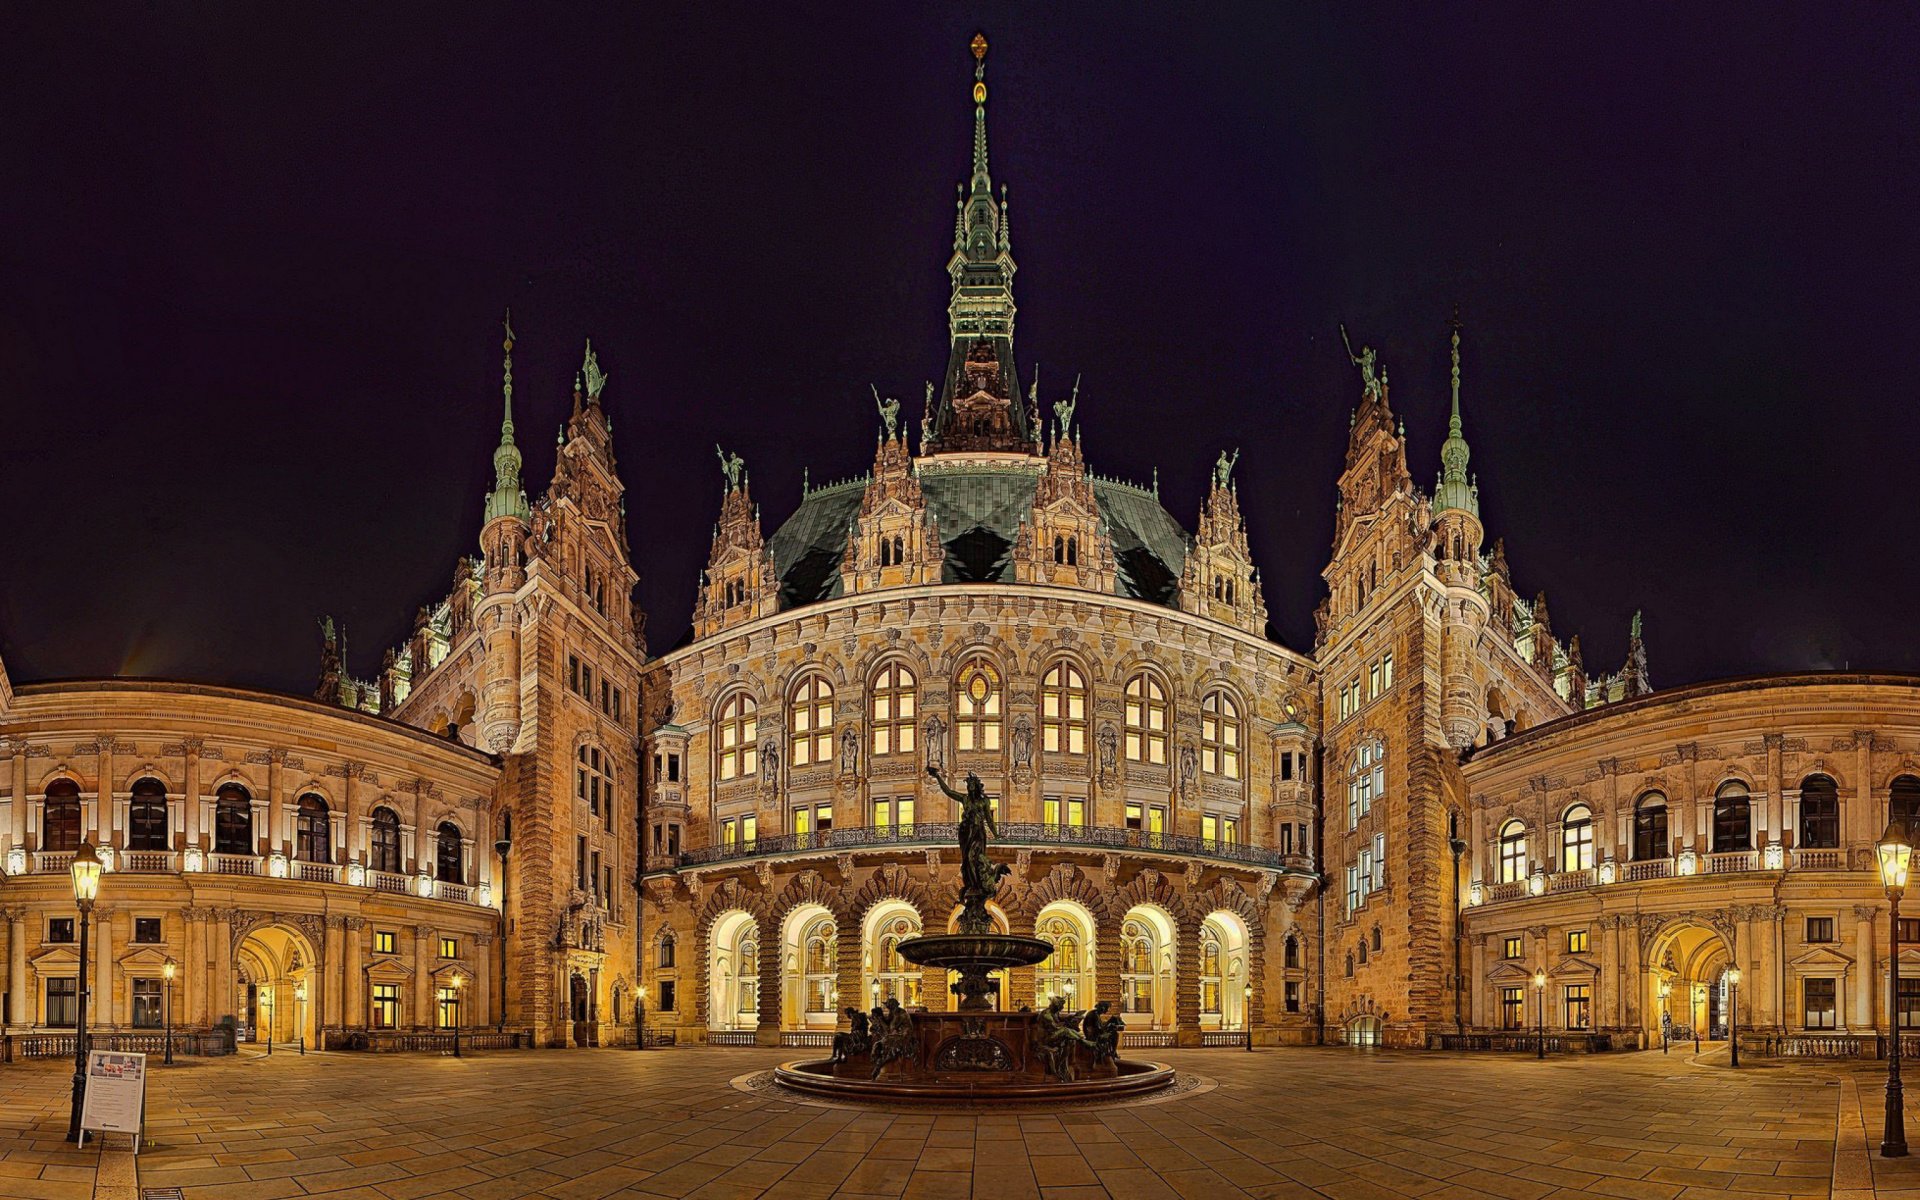 hamburg, man made, building, architecture, fountain, germany, statue